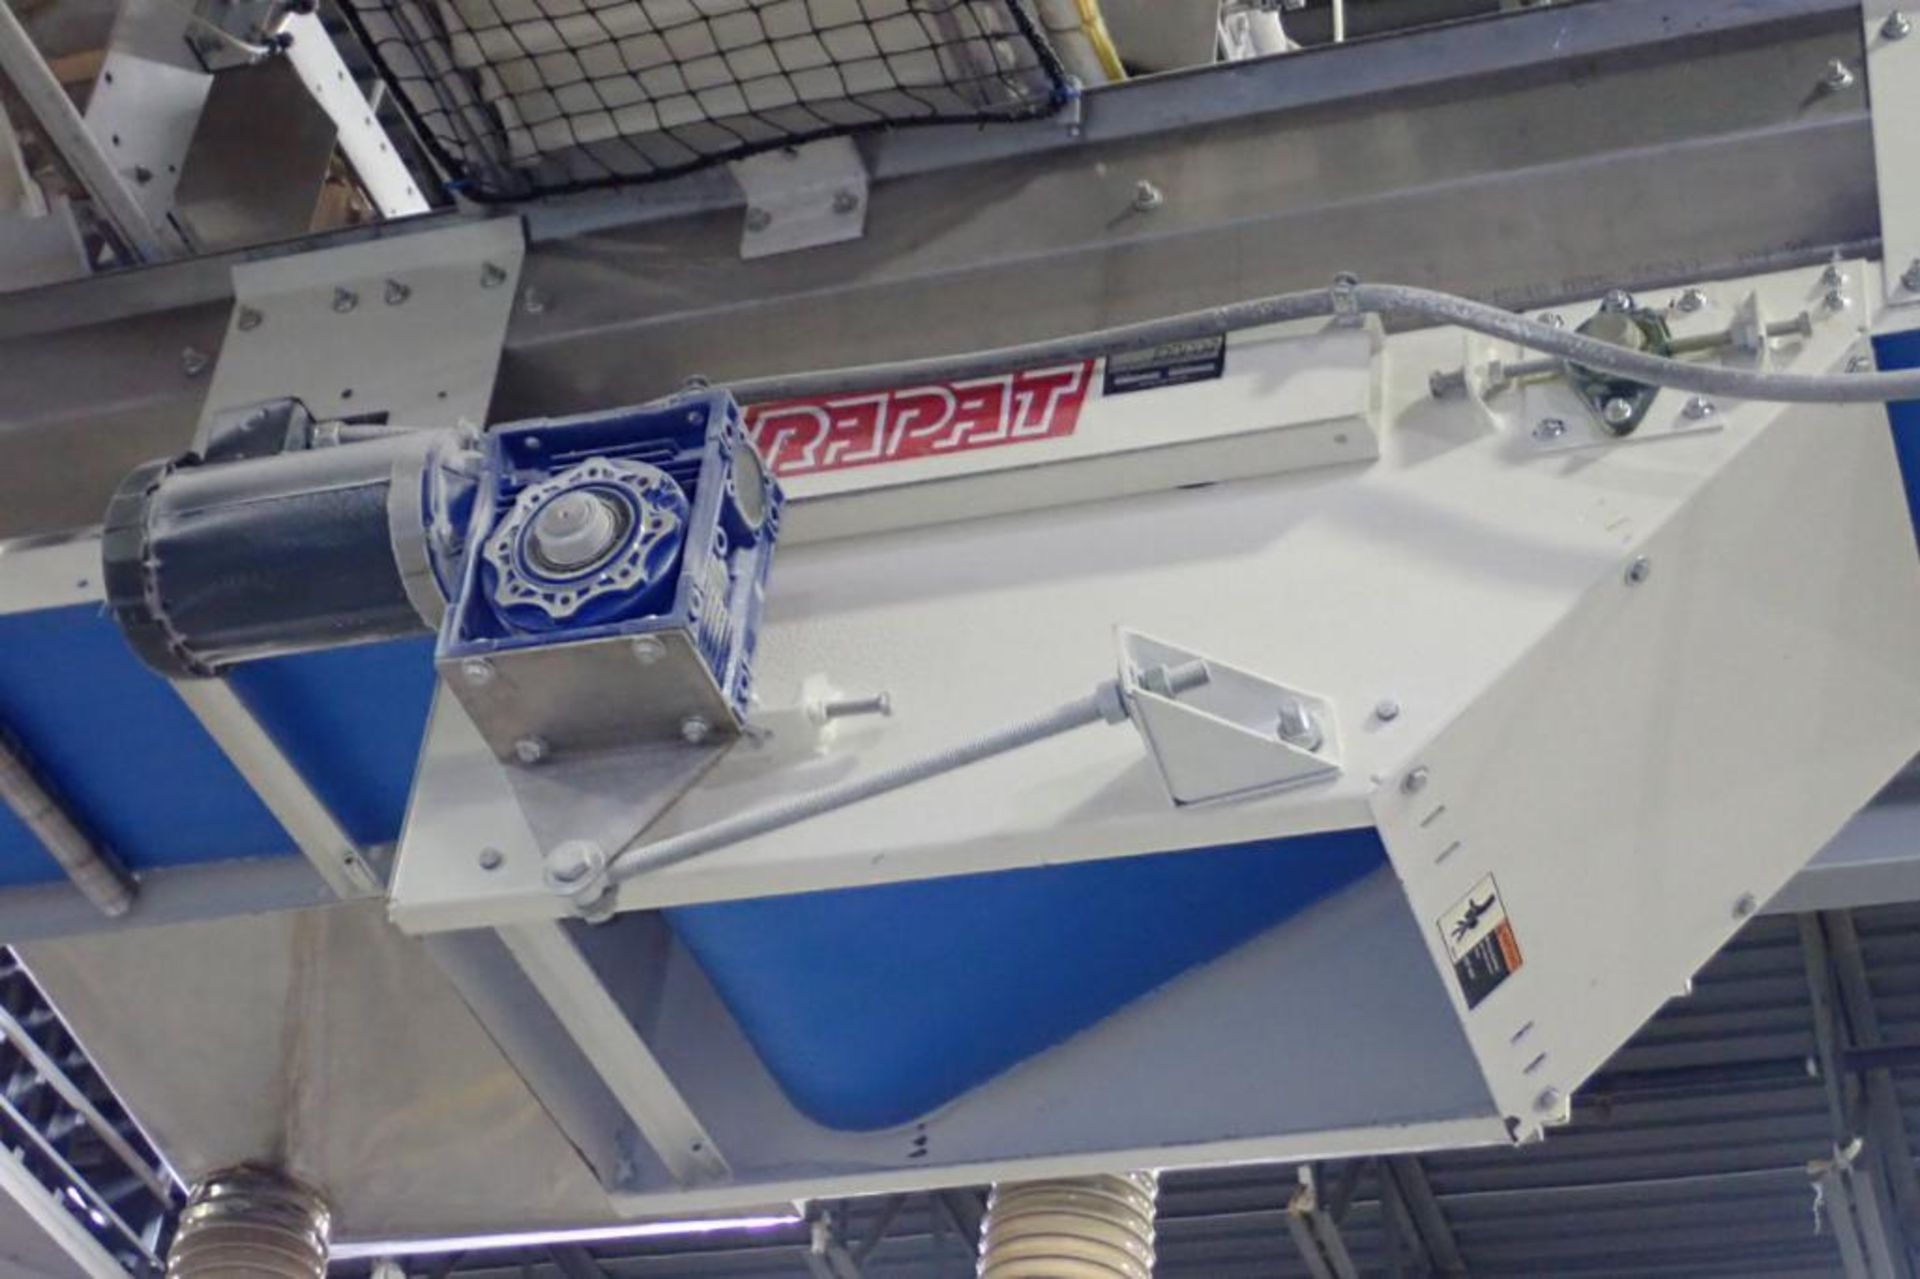 Rapat infeed conveyor, 20 ft. long x 24 in. wide, blue belt, motor and drive, suspended from ceiling - Image 2 of 4